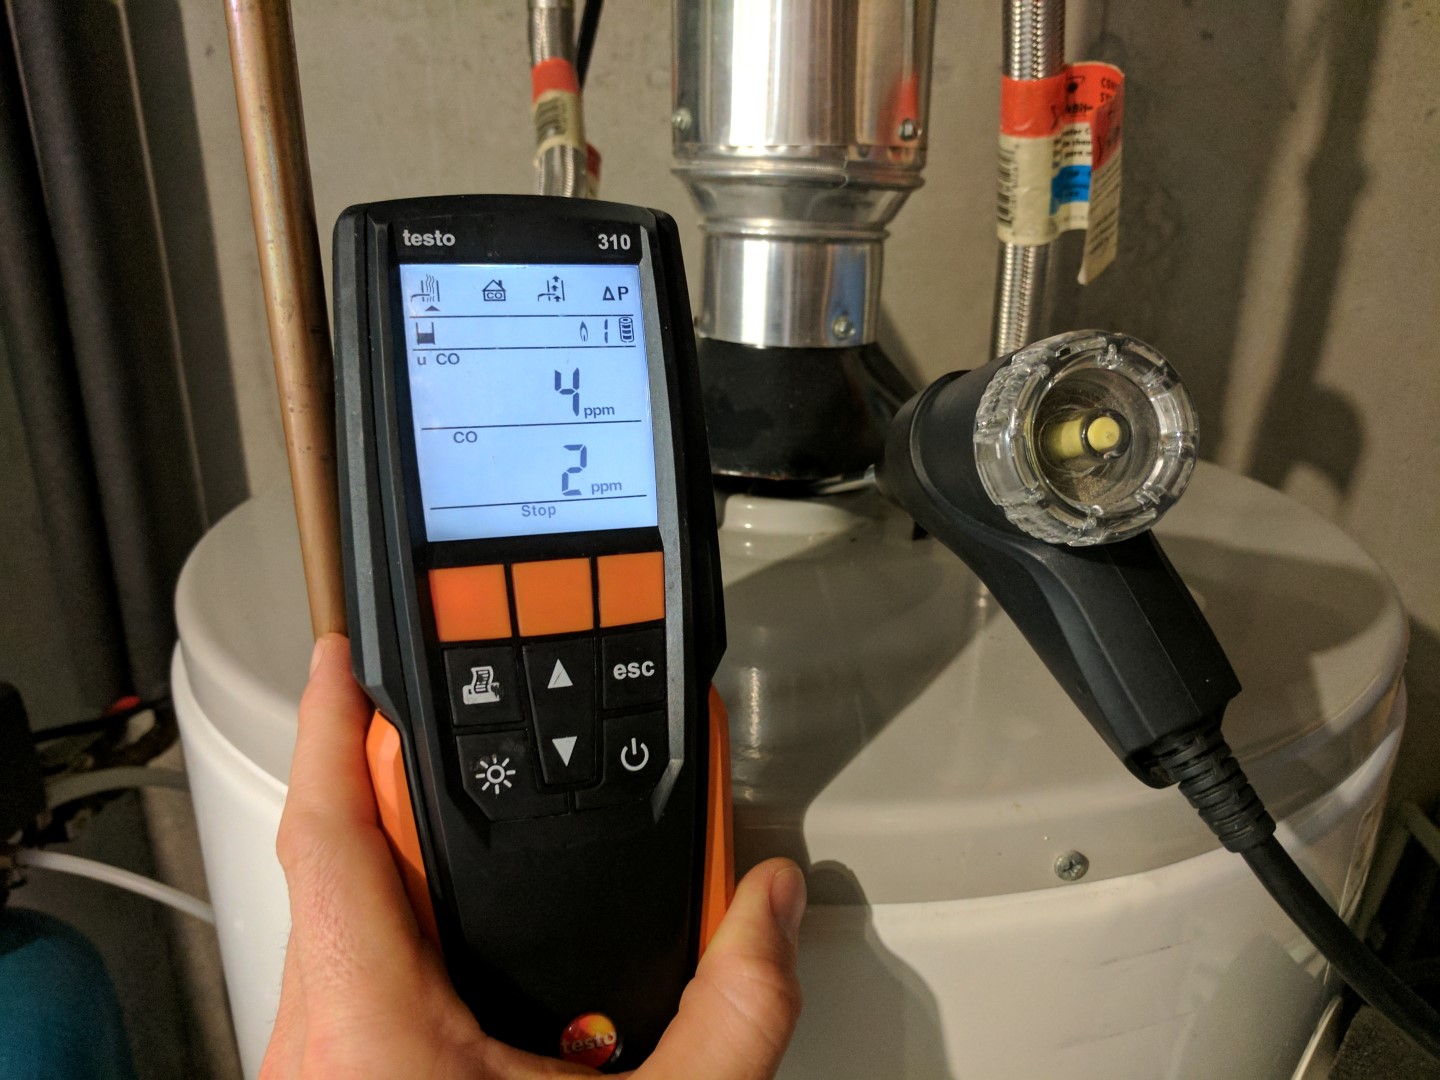 Water heater backdrafting: how to test for proper draft - Structure Tech  Home Inspections